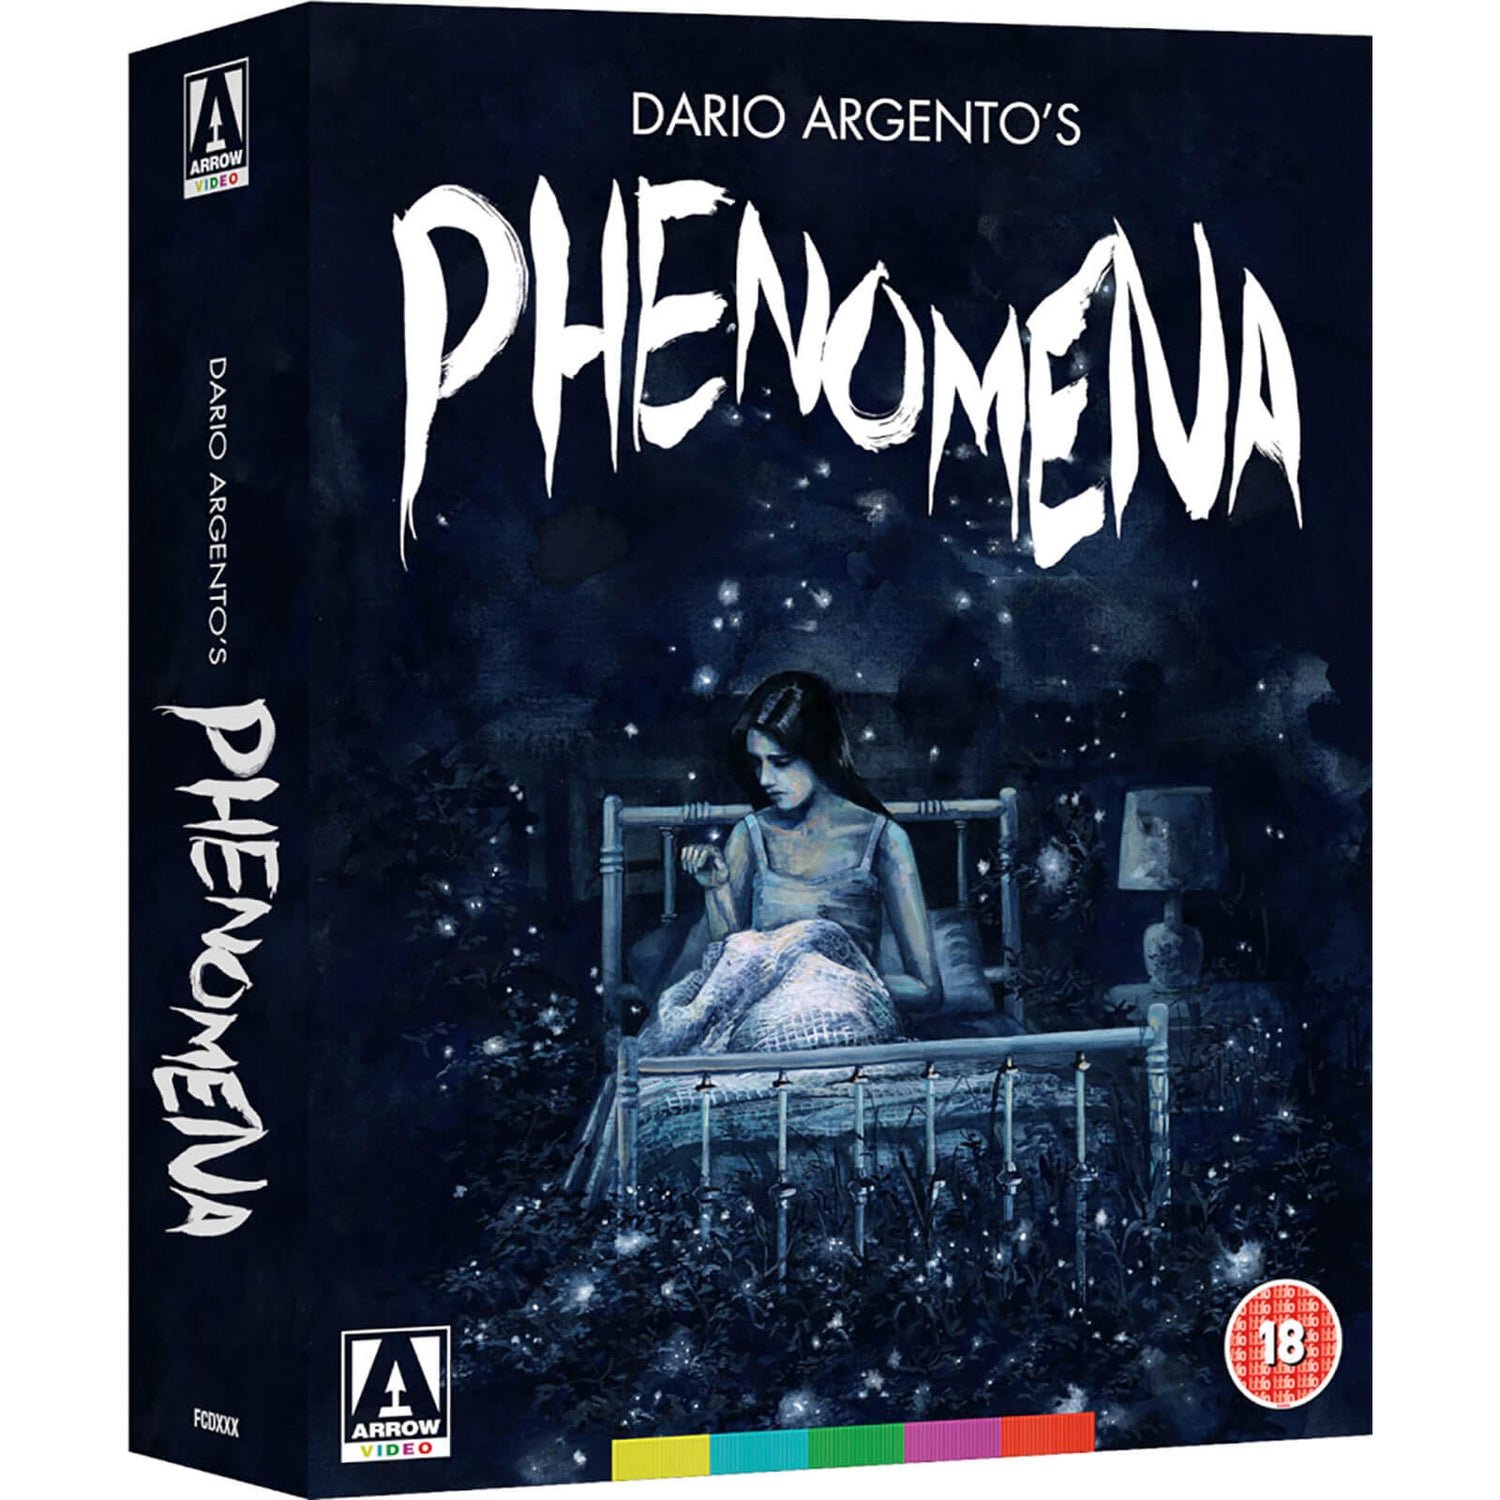 Phenomena - Dual Format (Includes DVD) (Limited Edition)